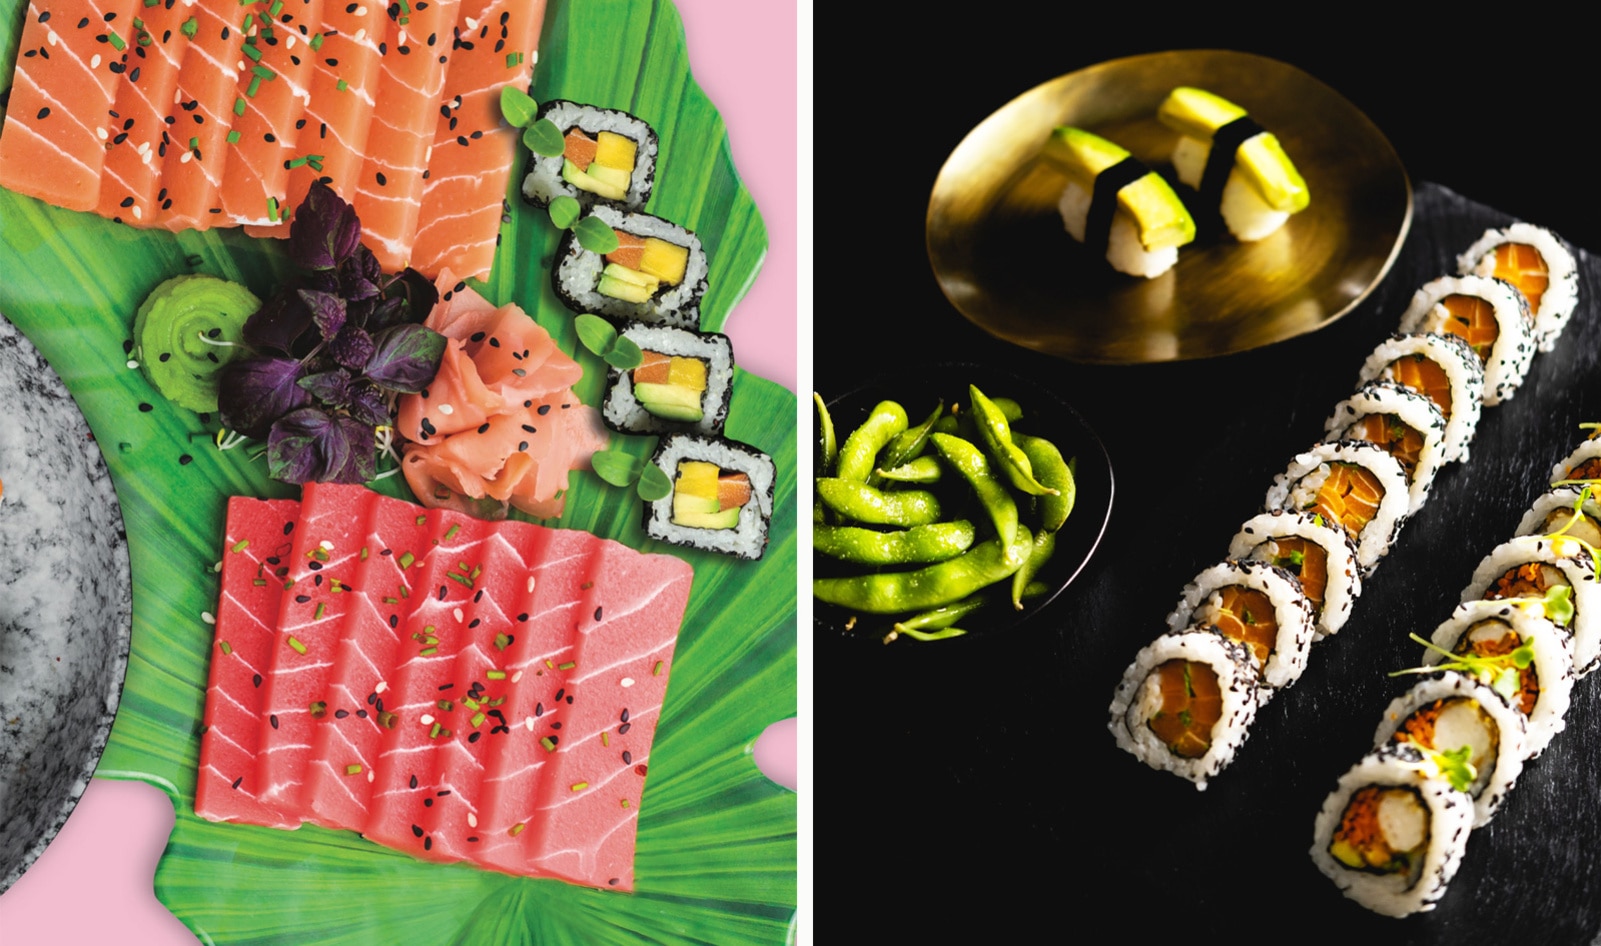 This Dutch Sushi Chain Just Launched Realistic Vegan Fish